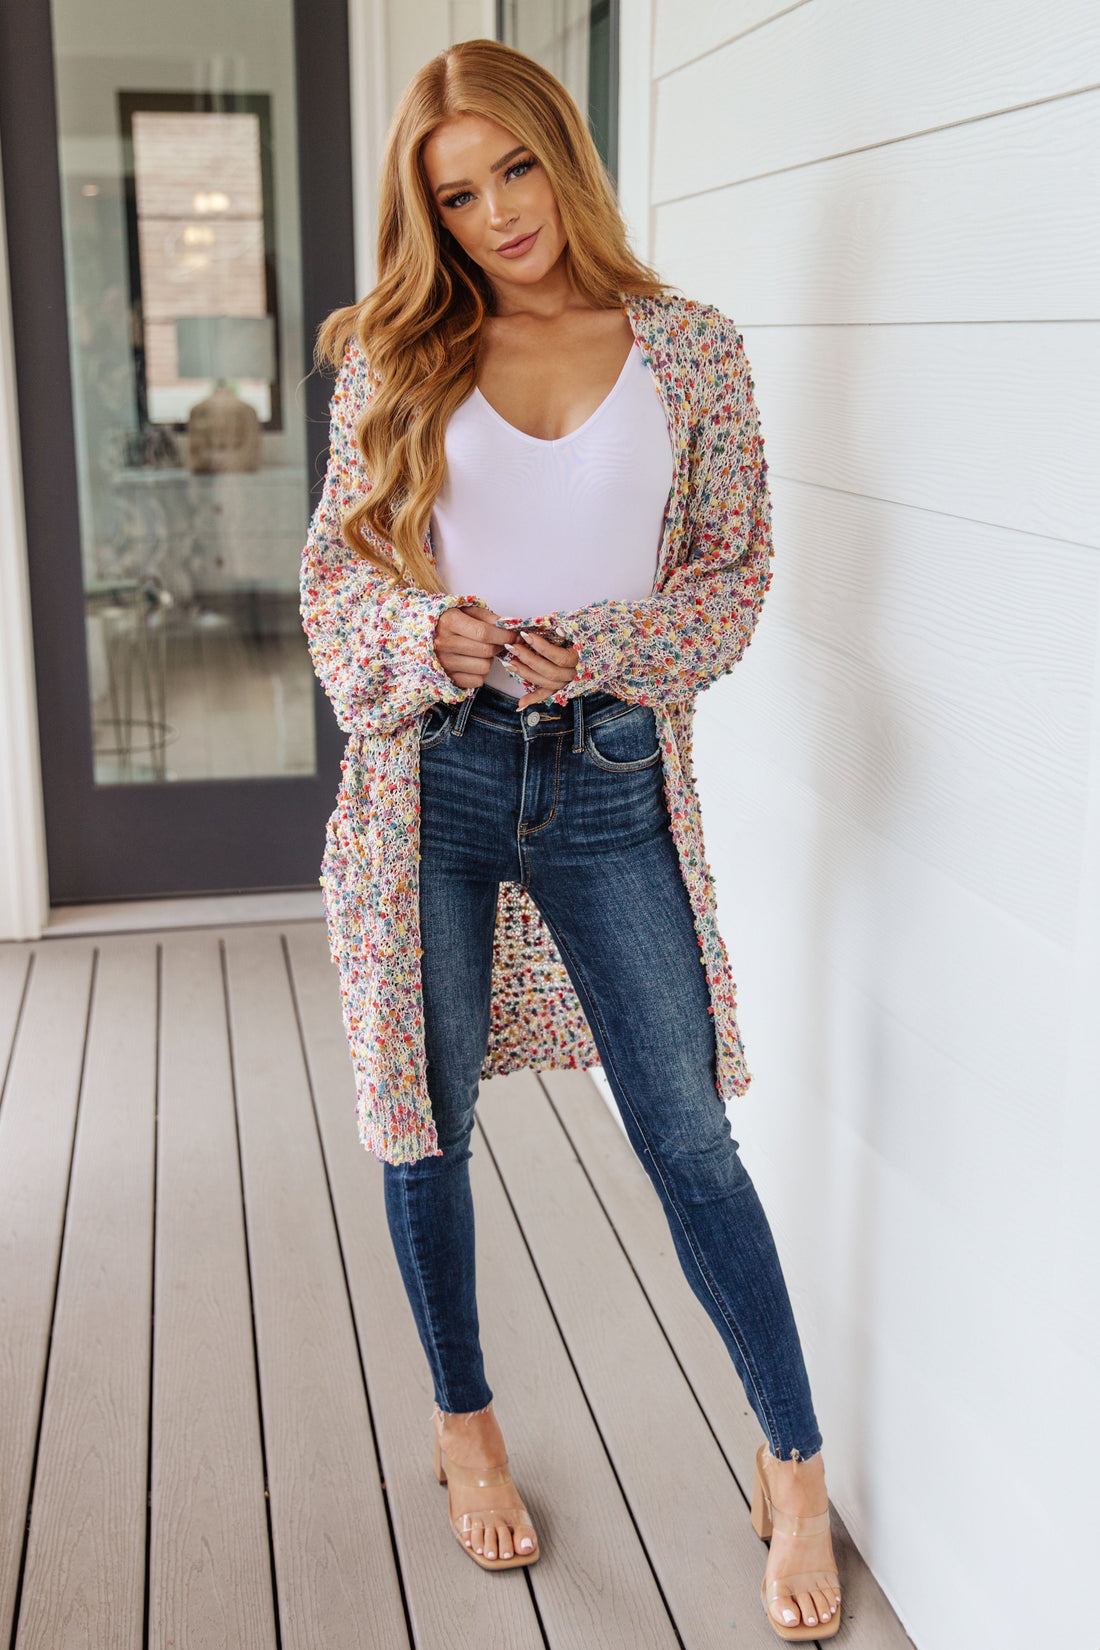 No Time Like The Present Confetti Cardigan in Ivory - WEBSITE EXCLUSIVE